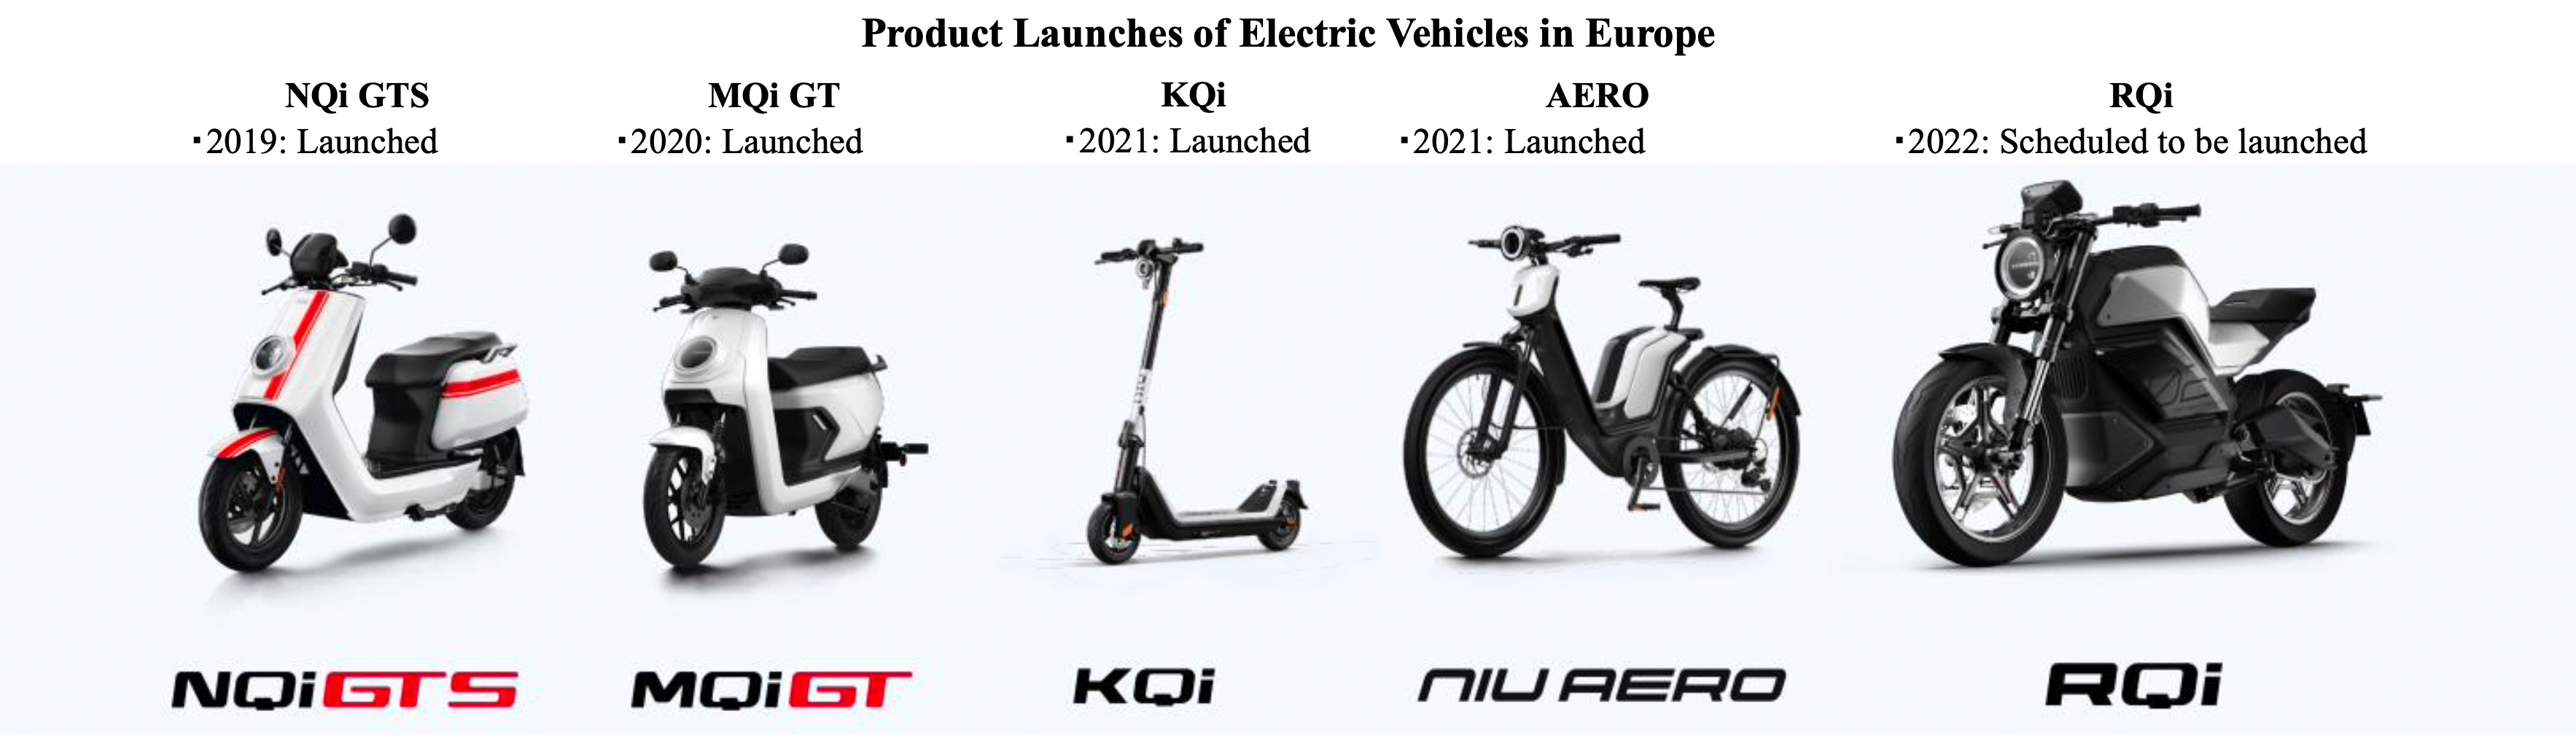 Product Launches of Electric Vehicles in Europe